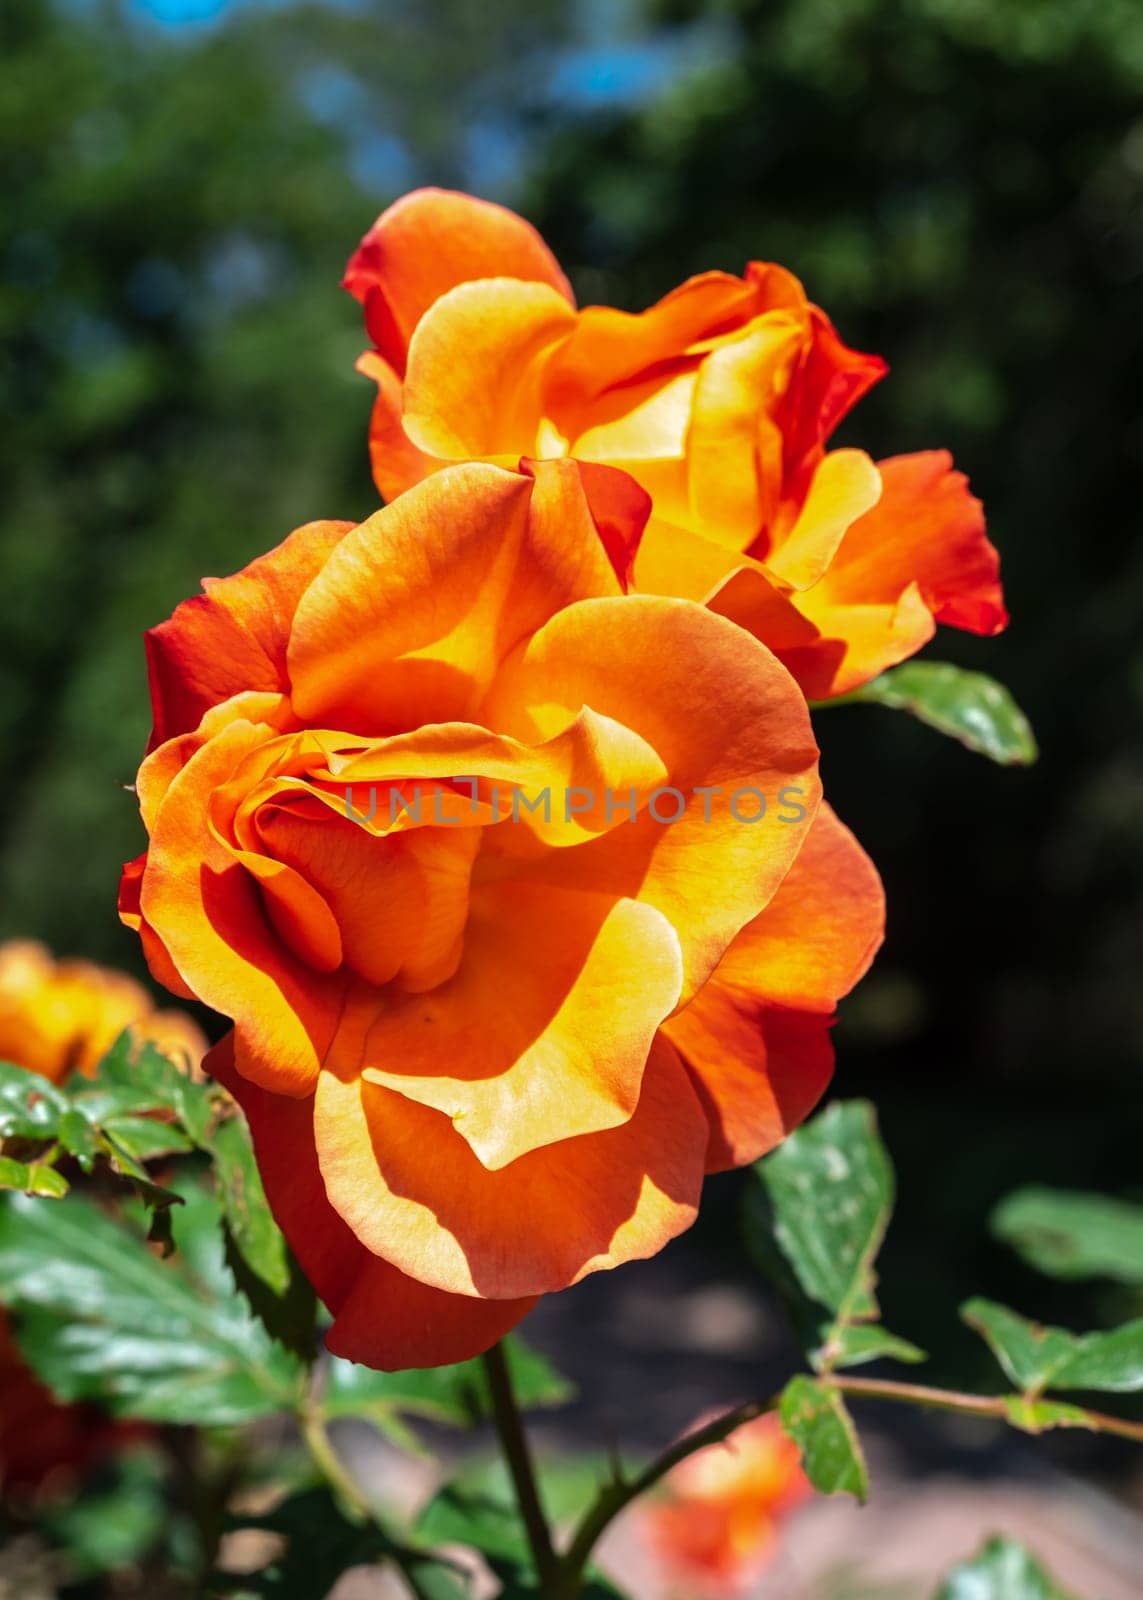 Blooming orange rose on a green leaves background by Multipedia